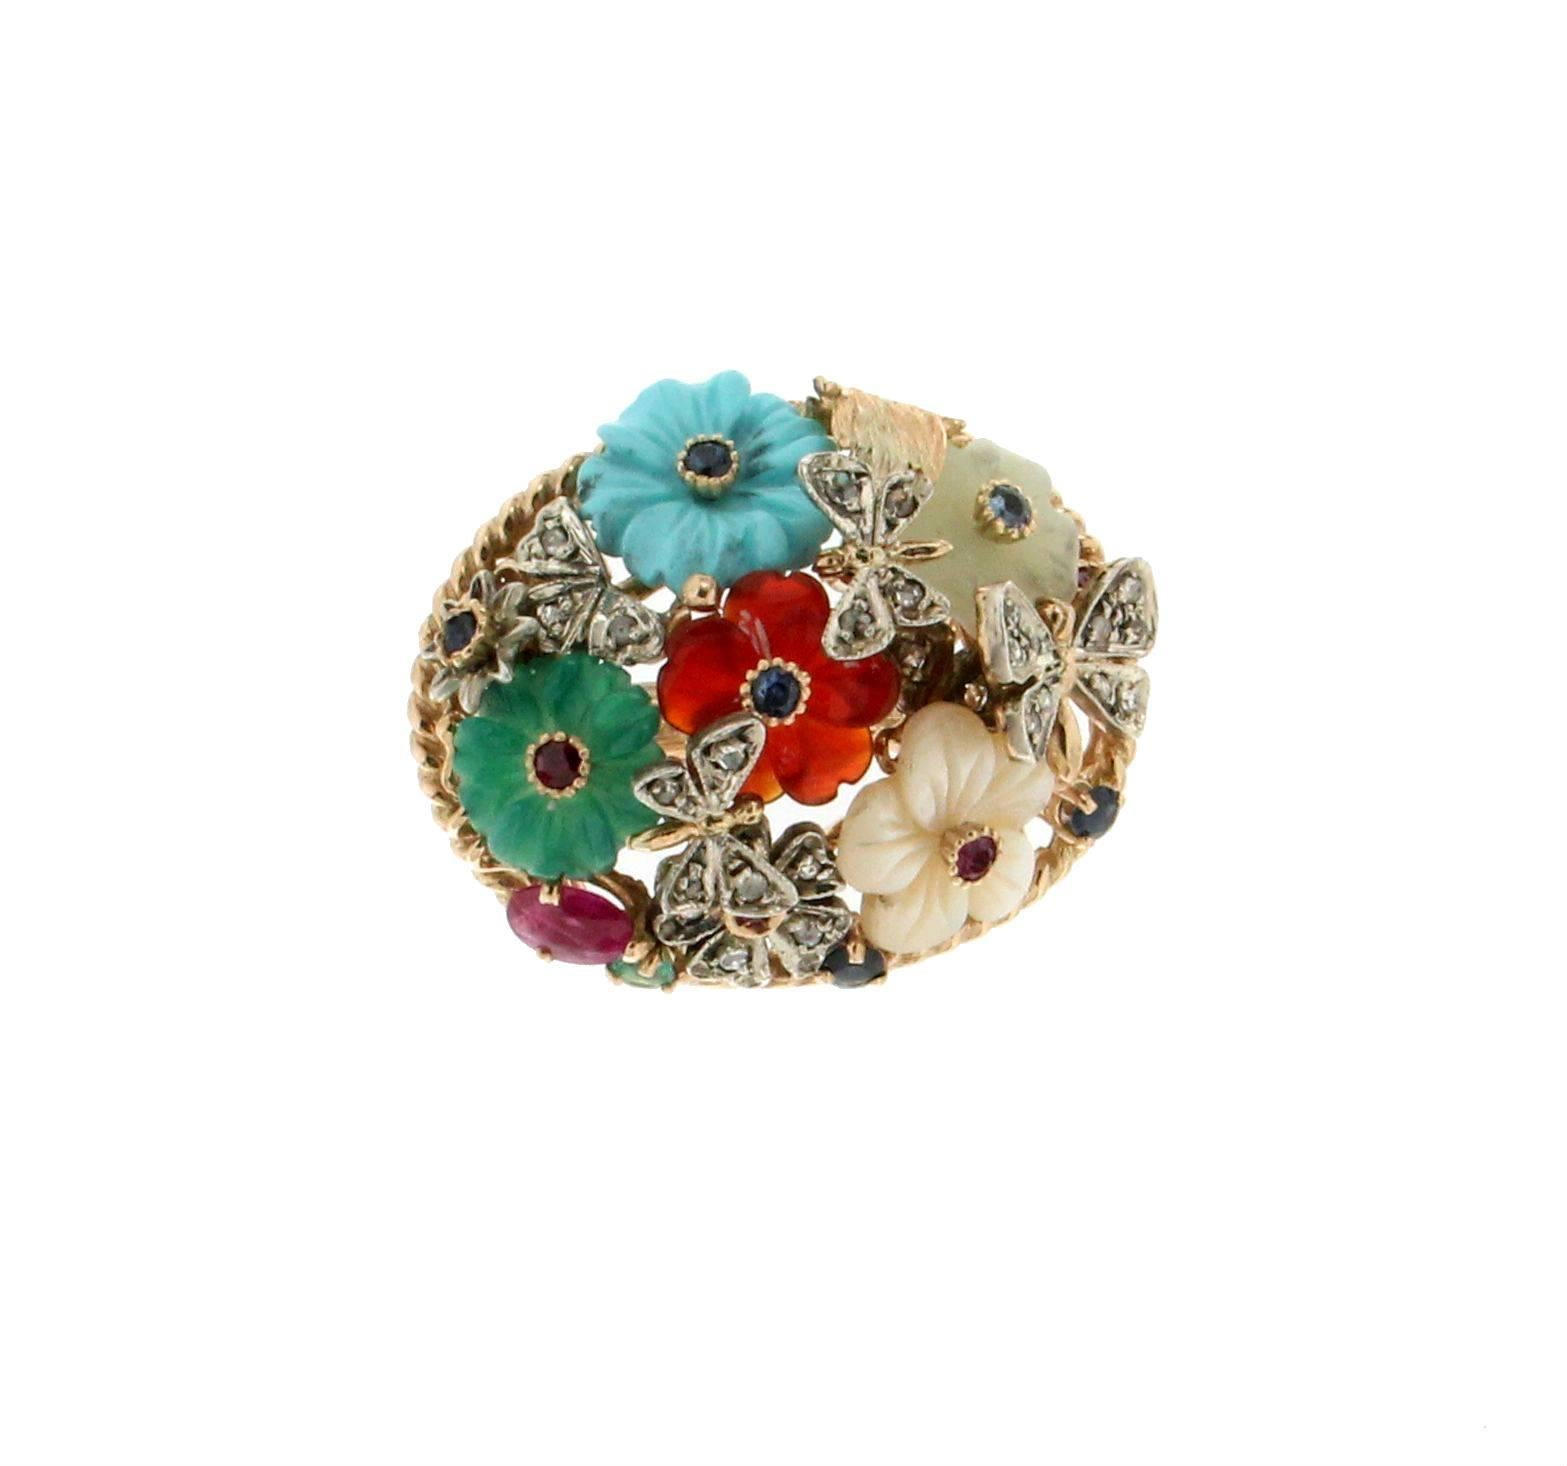 Yellow gold 14 carat and silver 925 carat mounted with diamonds,sapphires,emeralds,rubies and agate turquoise carnelian flowers, cocktail ring

Ring weight 17.90 grams
Diamonds weight 0.40 carat
Ring size 16.80 ITA 8 US